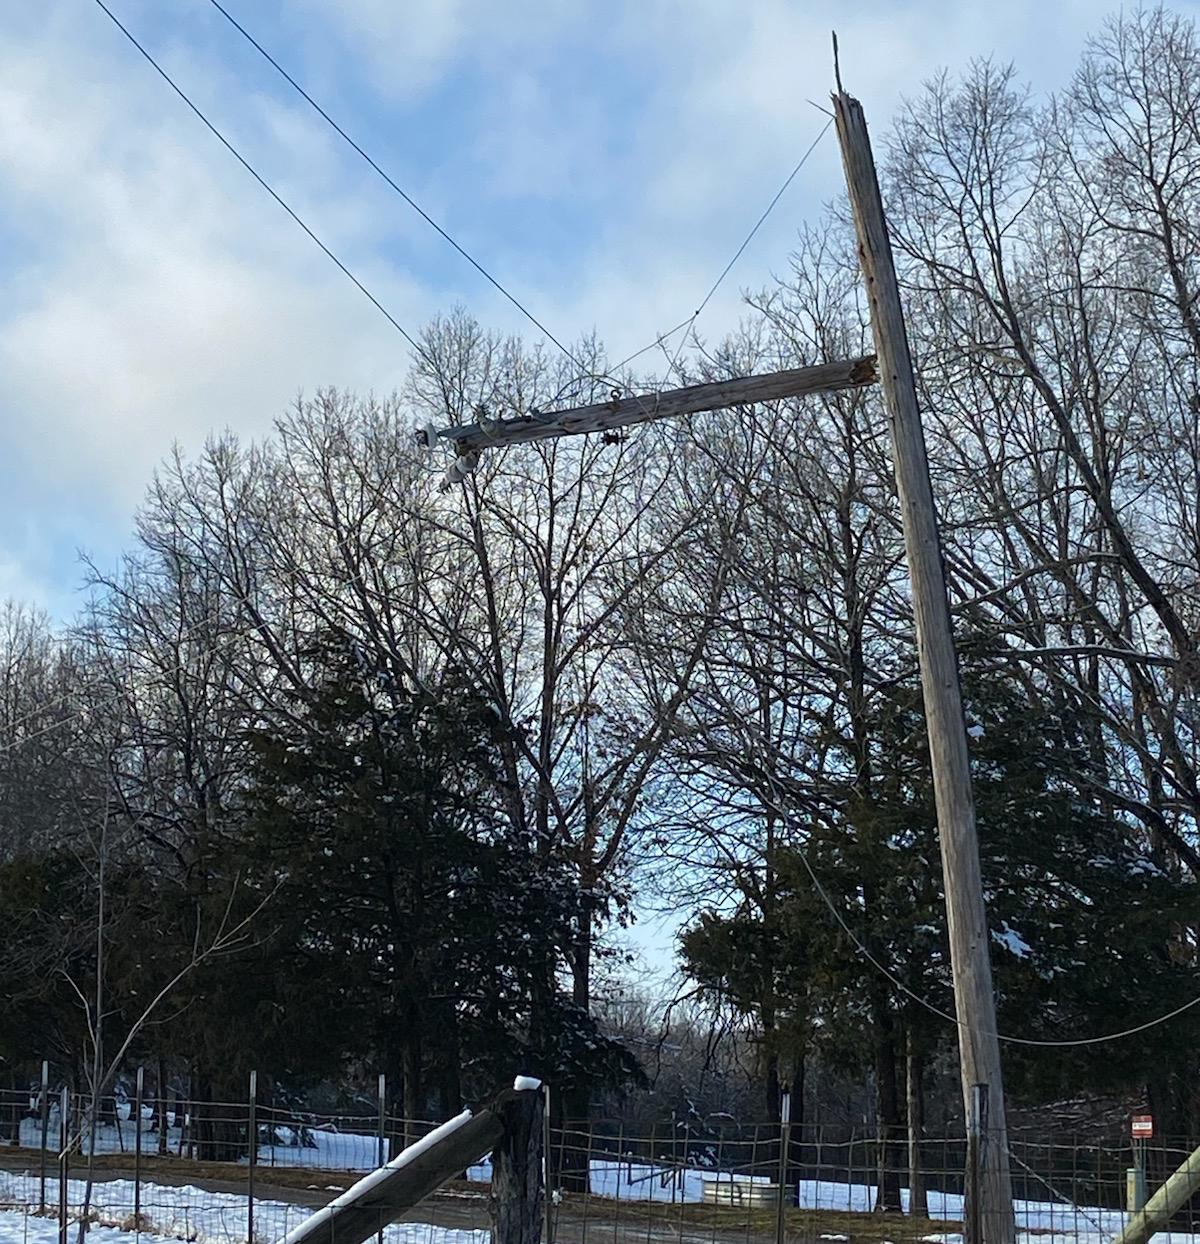 Crews are working to repair broken poles and downed wire.